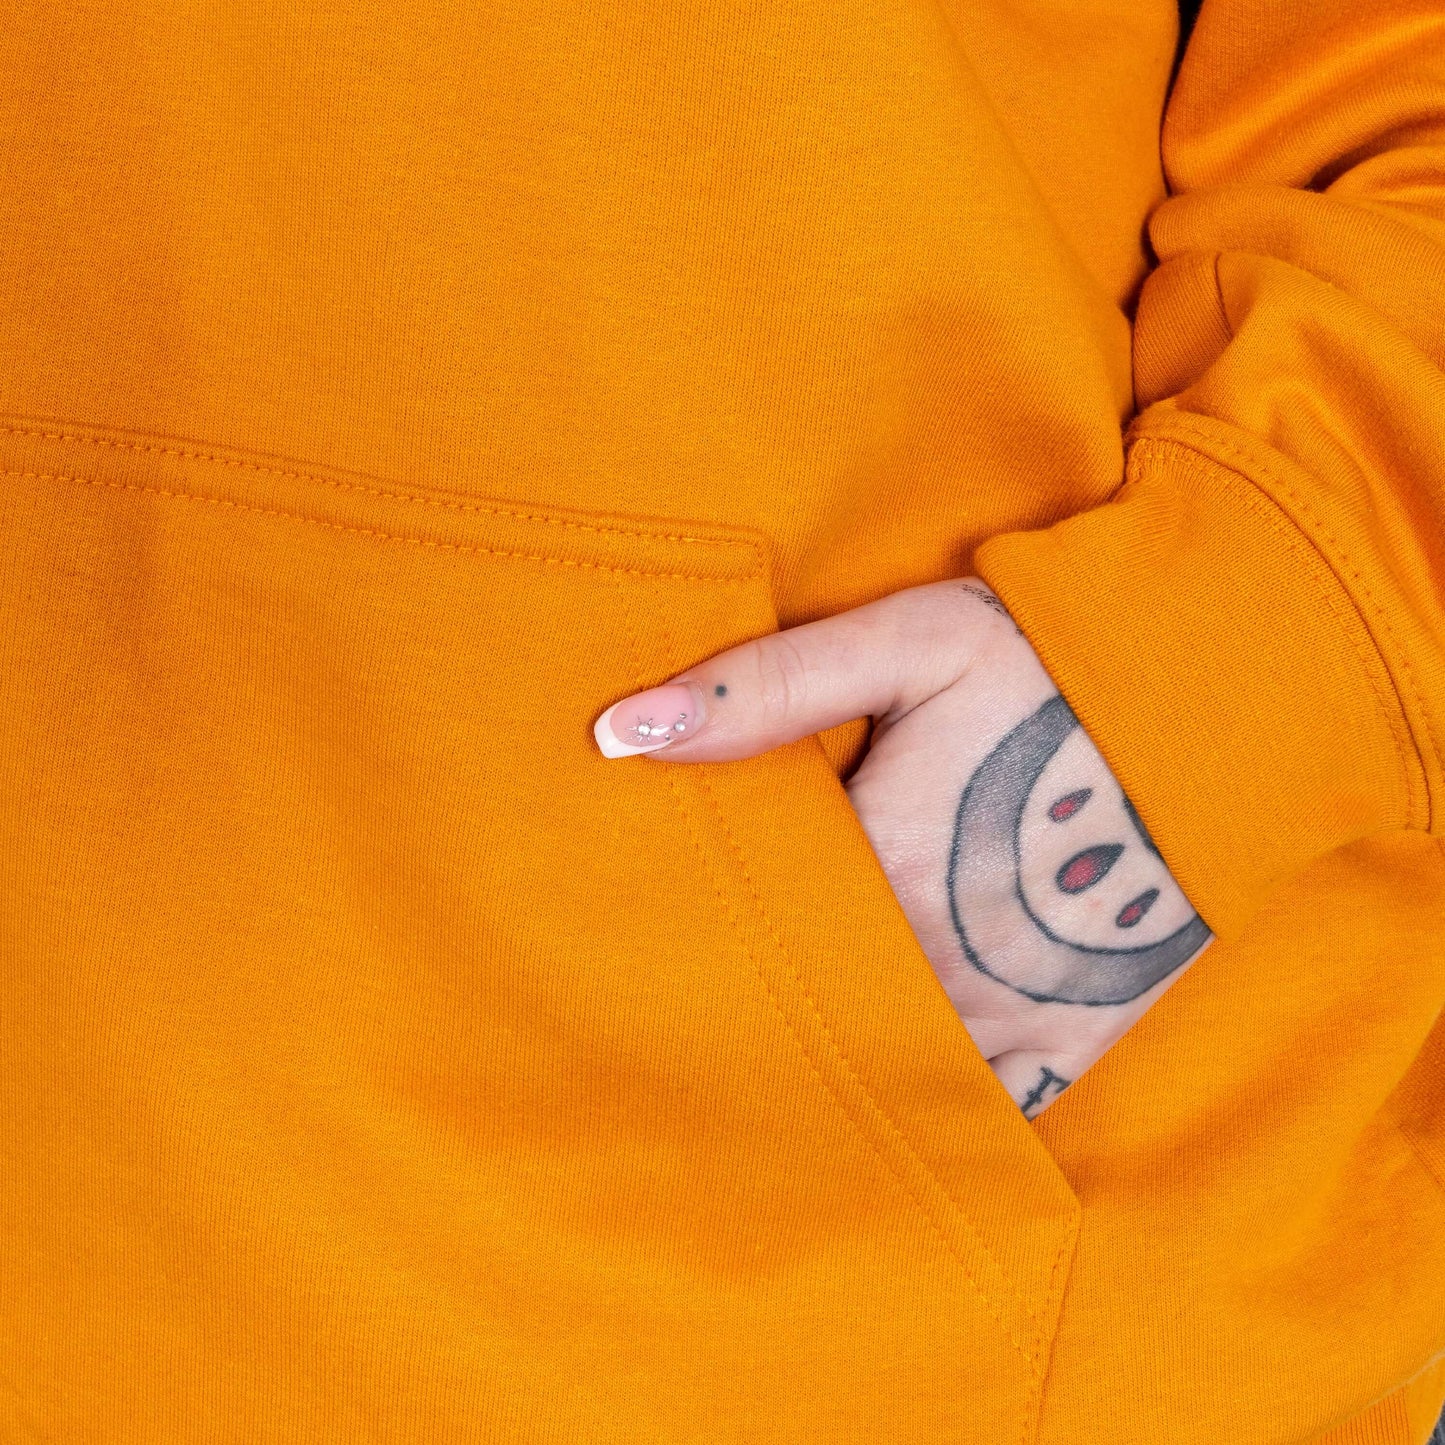 The Chronic Over Sharer Pumpkin Orange Hoodie modelled on Flo, a red haired alternative model, in front of a blue background. A close up of her tattooed hand in the front pocket. The pumpkin orange hoodie features a drawstring hood, a large front pocket and the text 'chronic oversharer' in rainbow bubble font with a black shadow effect and white sparkles. The design was created to raise awareness for neurodivergent disorders such as ADHD.